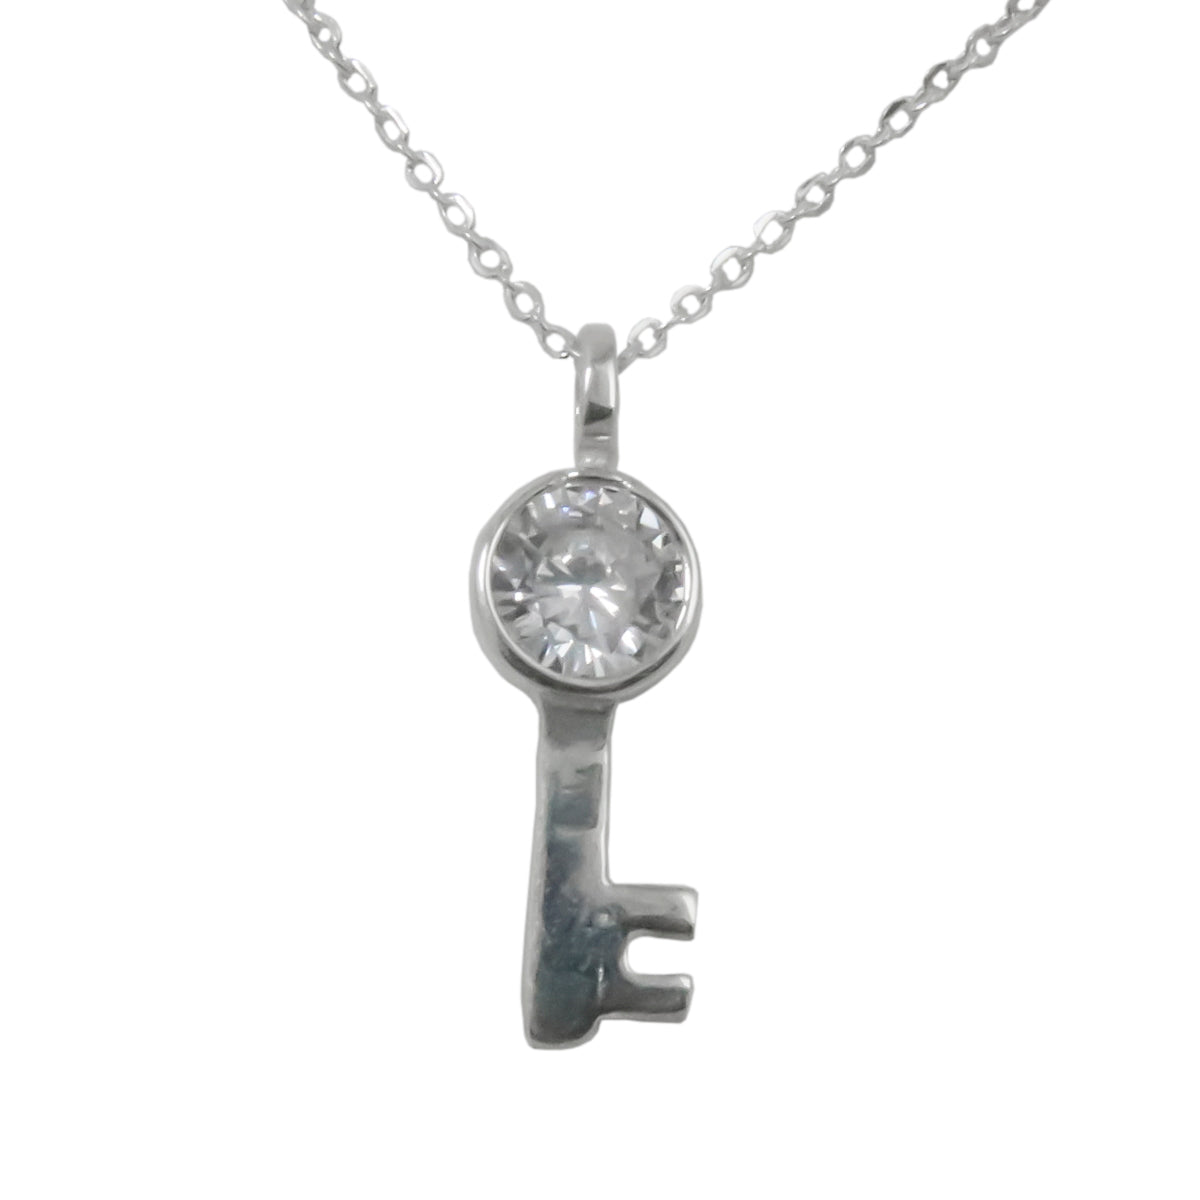 Sterling Silver Heart and Key Treasure Necklace